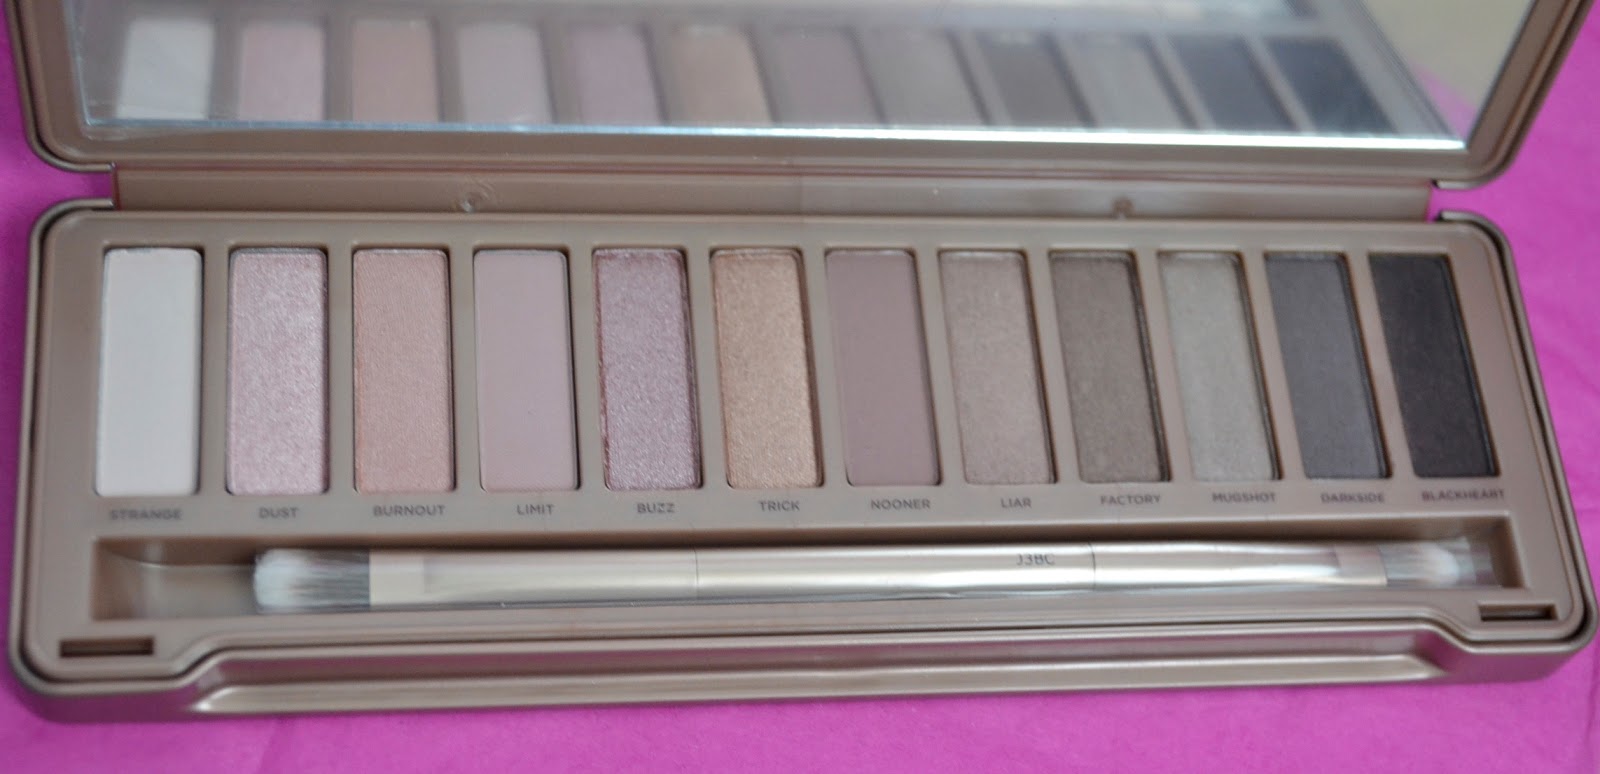 Urban Decay Naked 3 Palette: Initial Review, Swatches, and 